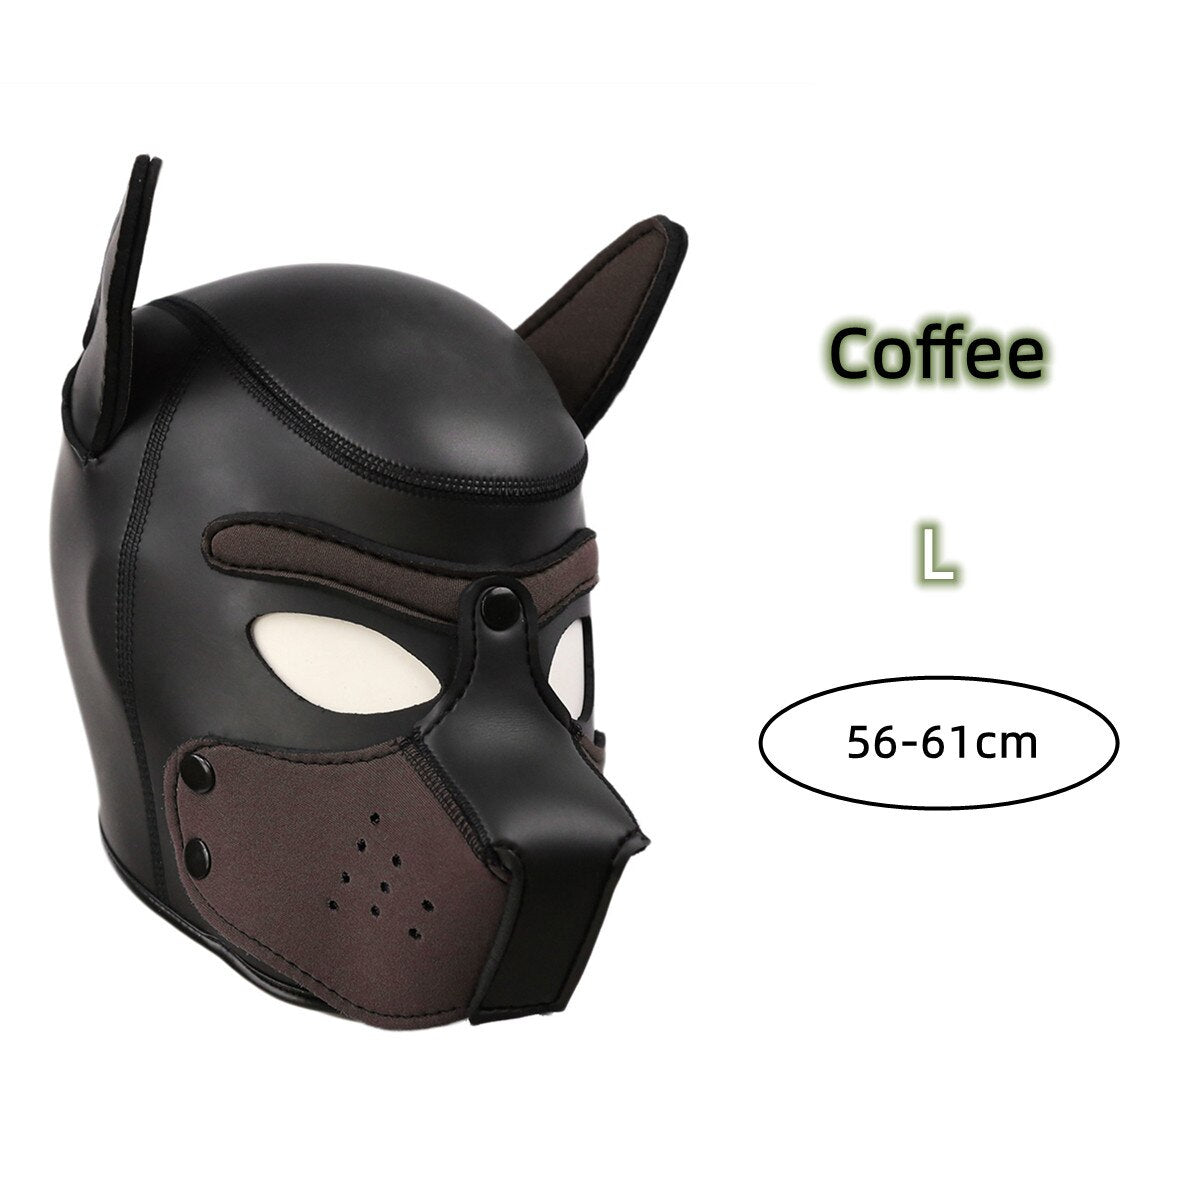 XL Code Brand New Increase Large Size Puppy Cosplay Padded Rubber Full Head Hood Mask with Ears for Men Women Dog Role Play